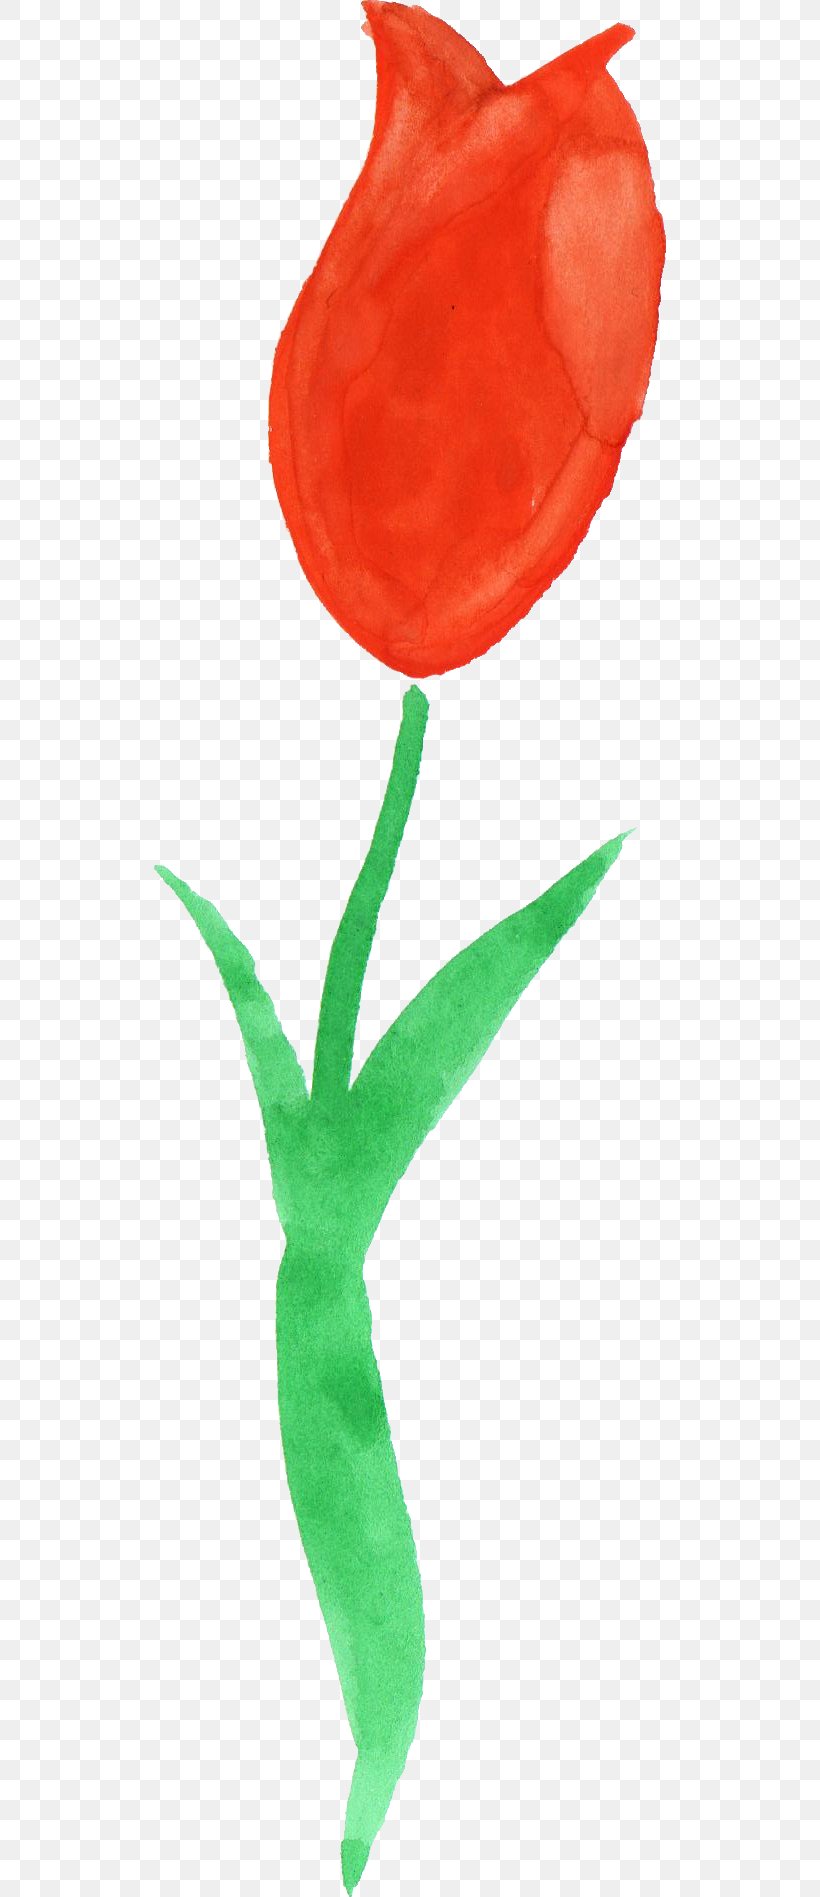 Tulip Watercolor Painting Clip Art, PNG, 513x1897px, Tulip, Flora, Flower, Flowering Plant, Garden Roses Download Free